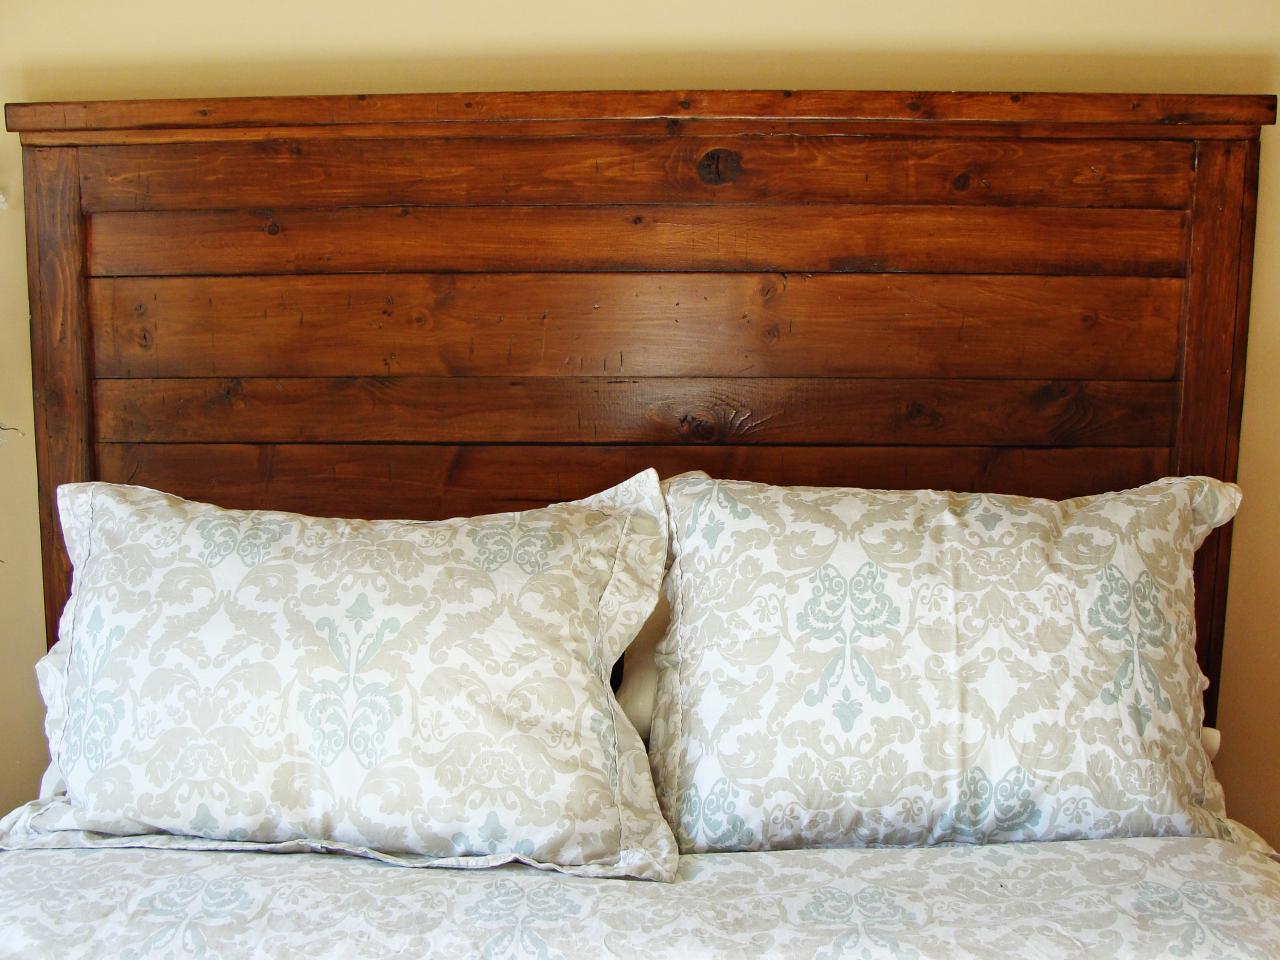 How To Build A Rustic Wood Headboard, Wood Bed Frame King Diy